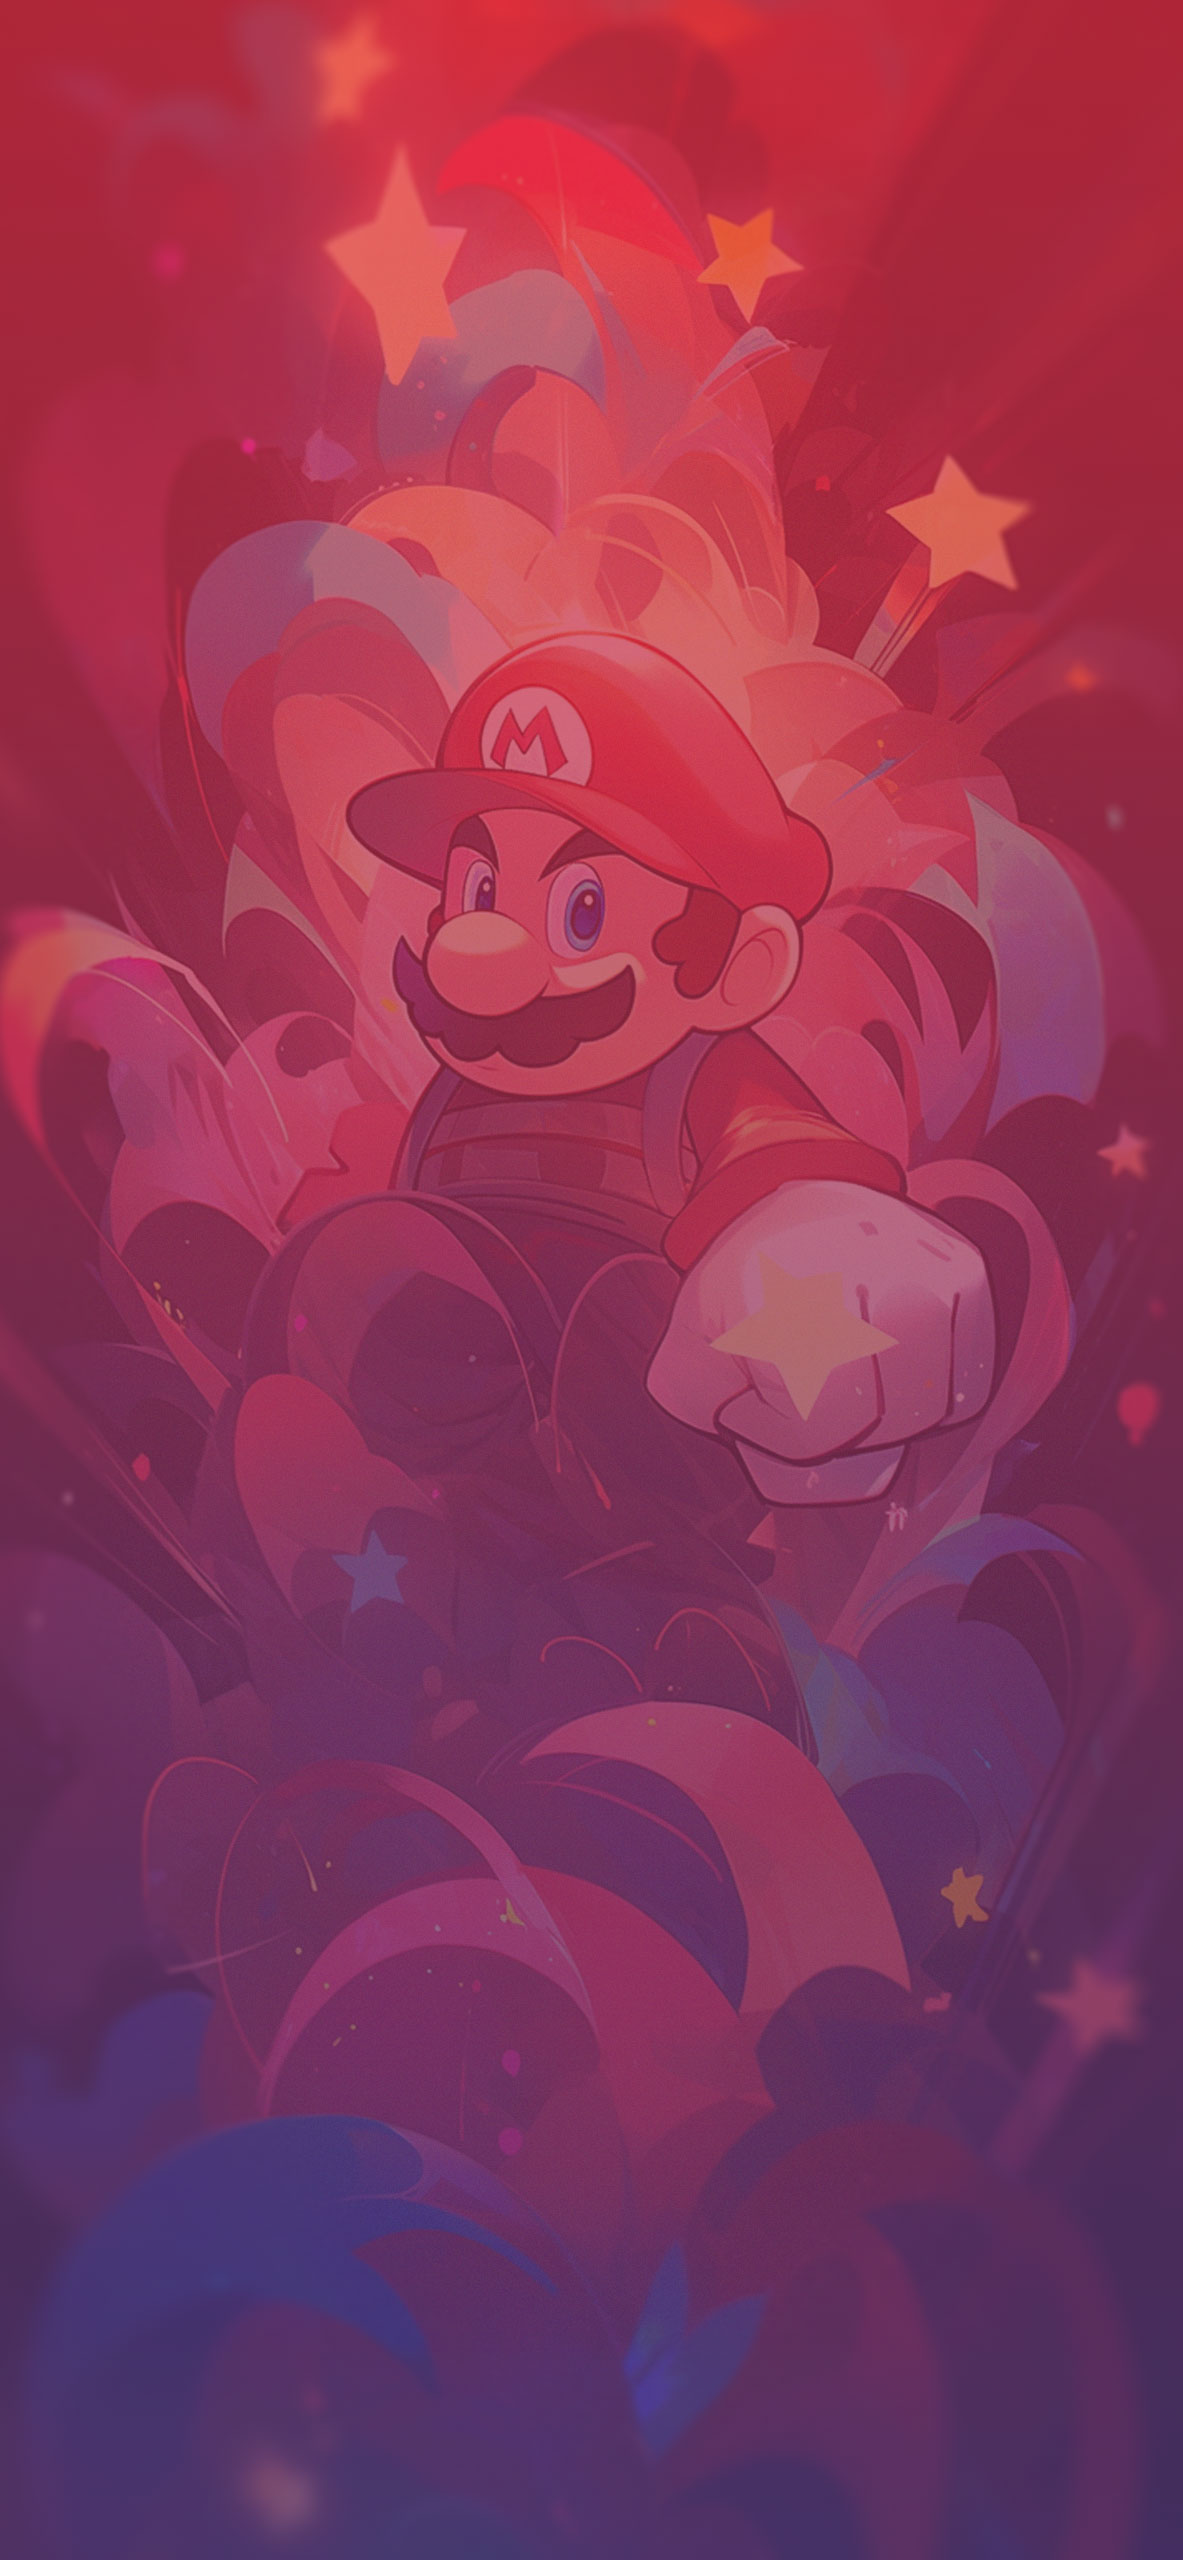 Press The Buttons Nintendo Anniversary iPhone Wallpapers Are Neat